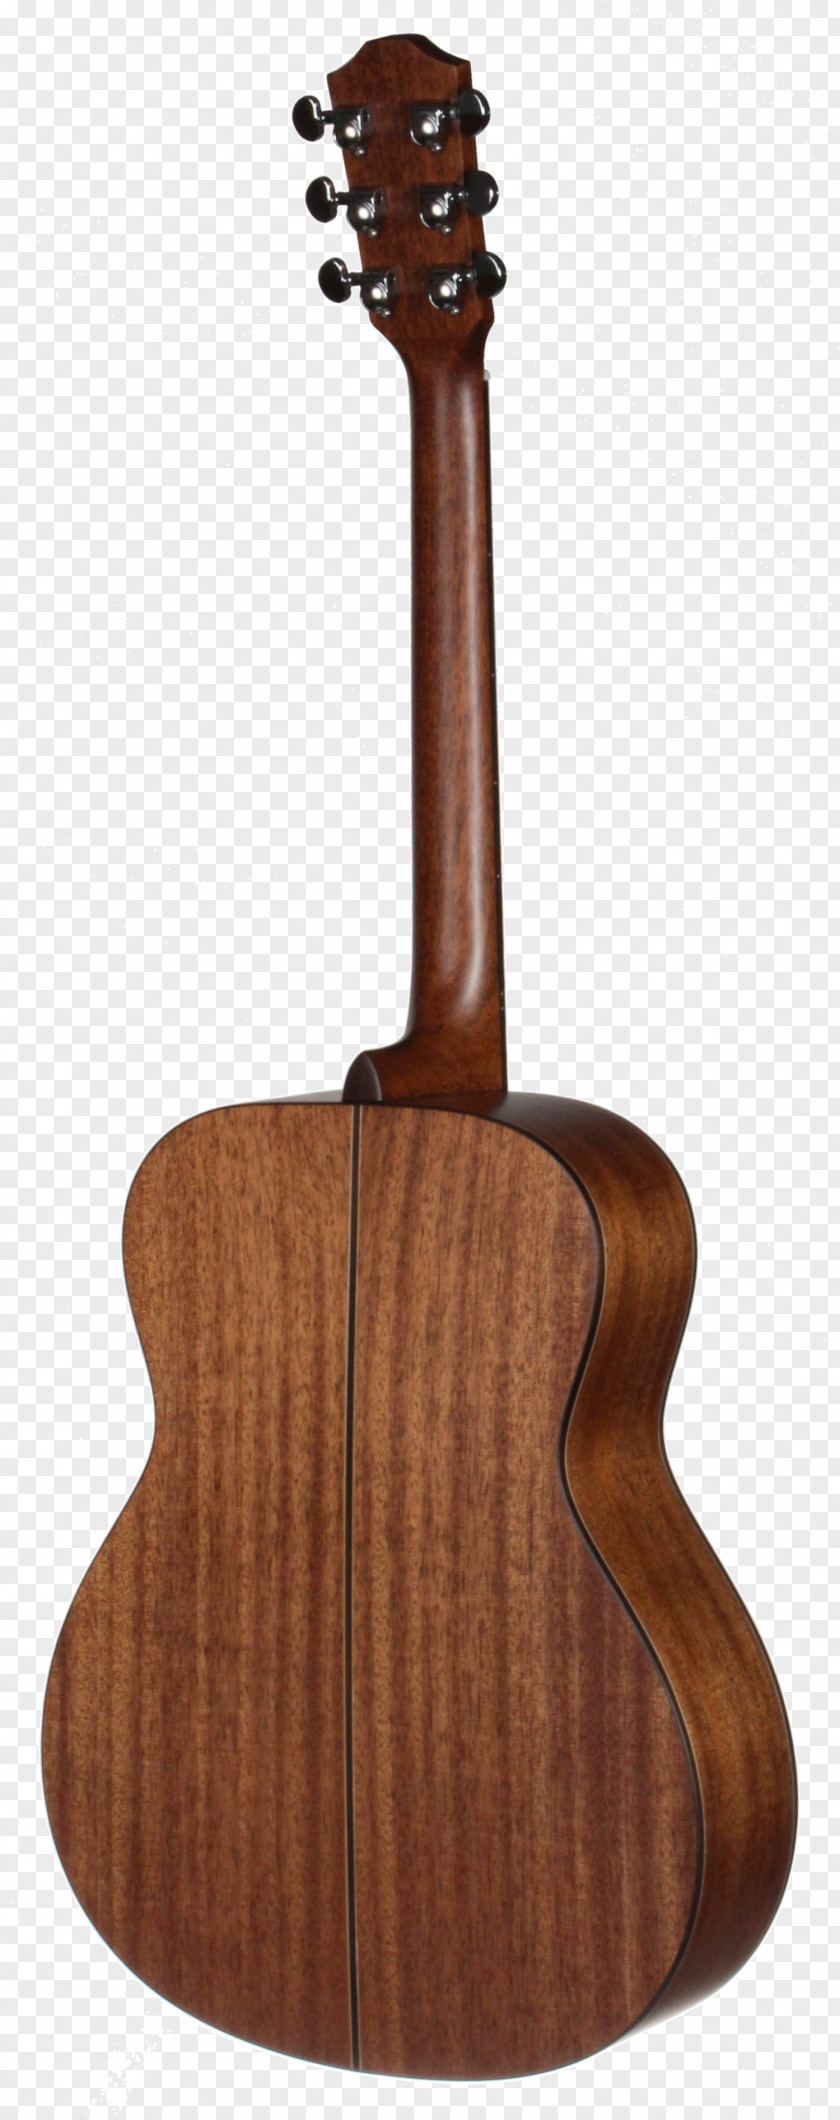 Acoustic Guitar C. F. Martin & Company Acoustic-electric Dreadnought PNG